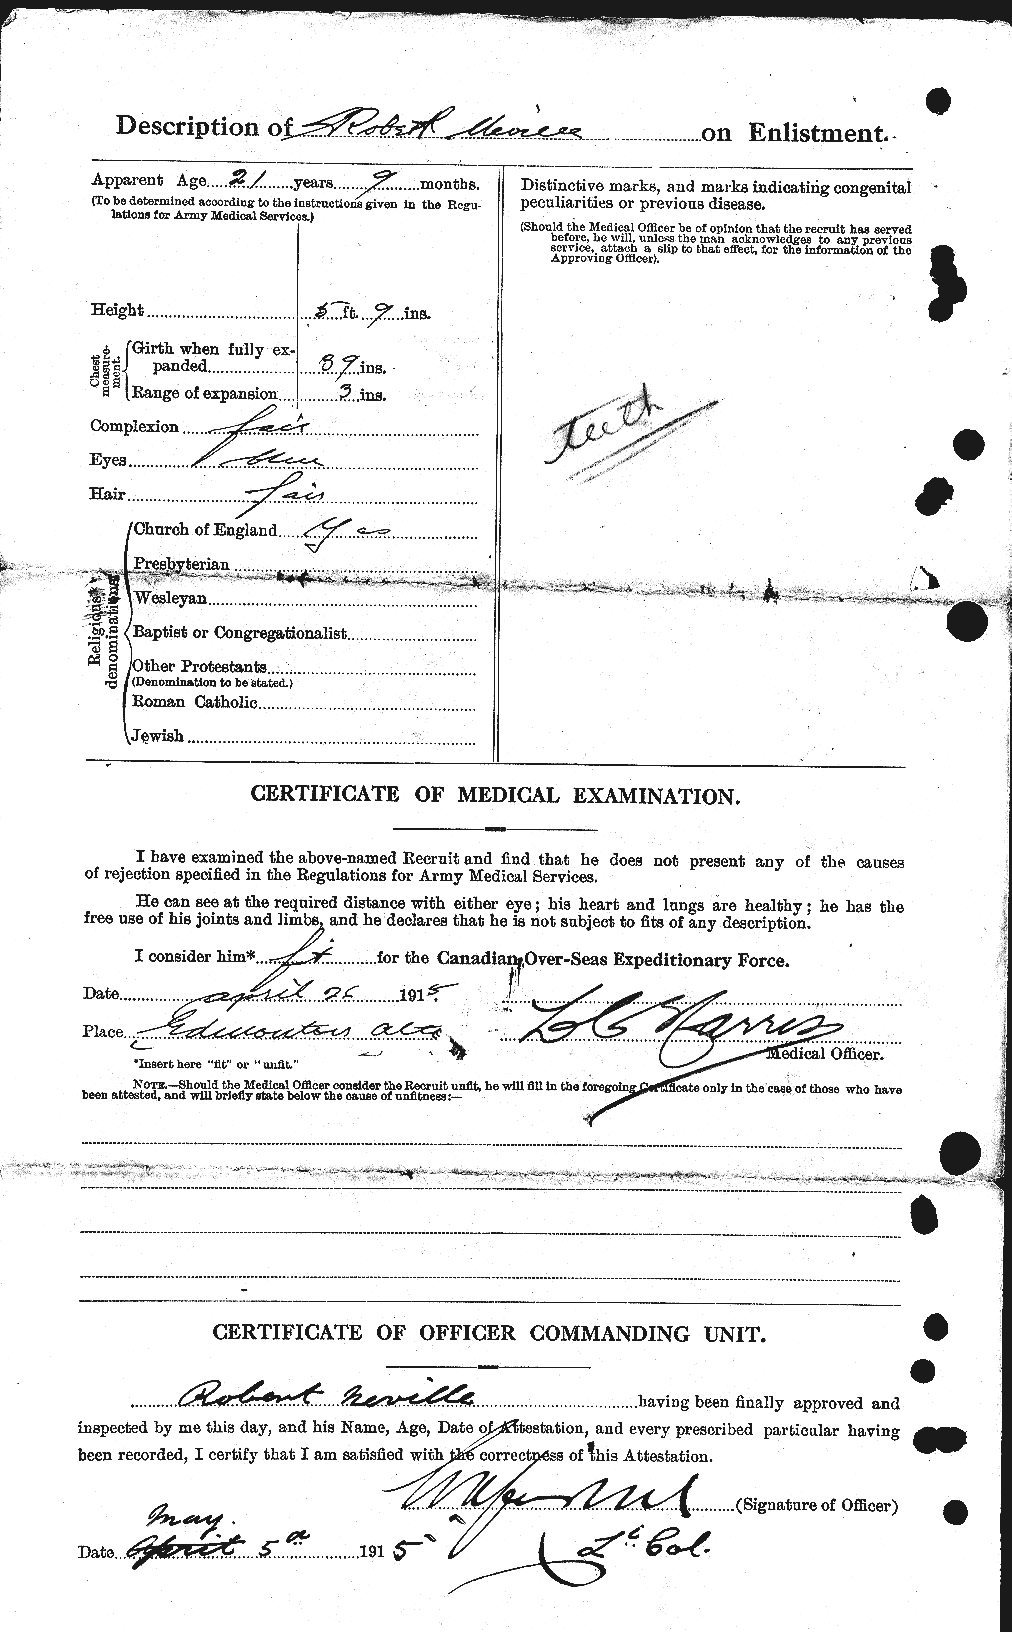 Personnel Records of the First World War - CEF 550404b